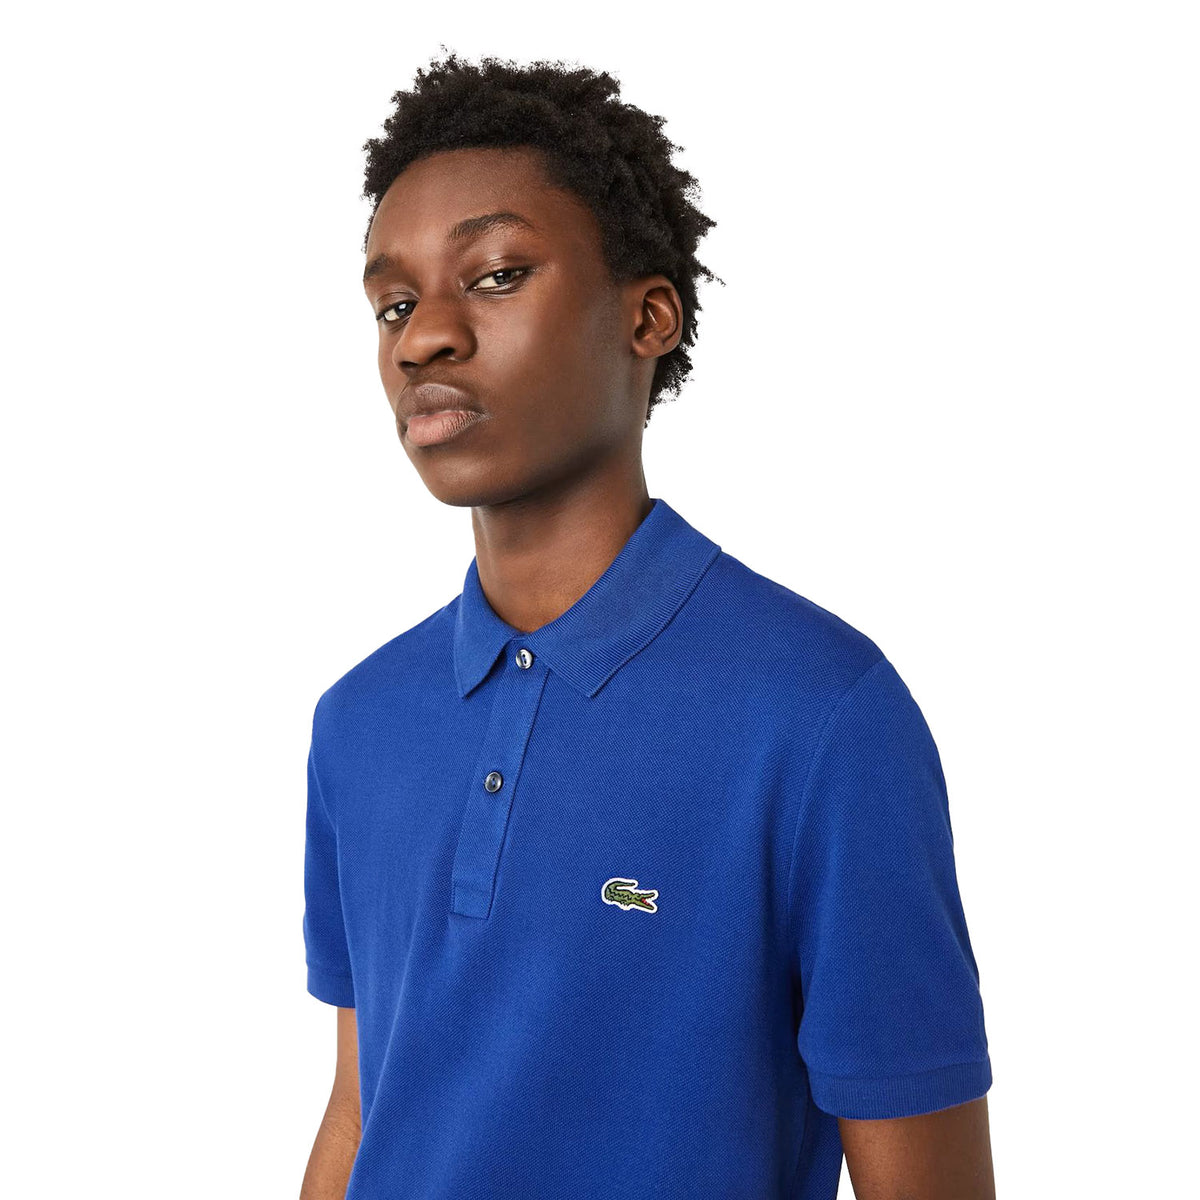 Lacoste Polo Shirt in Navy - classic two button cotton pique, short sleeve